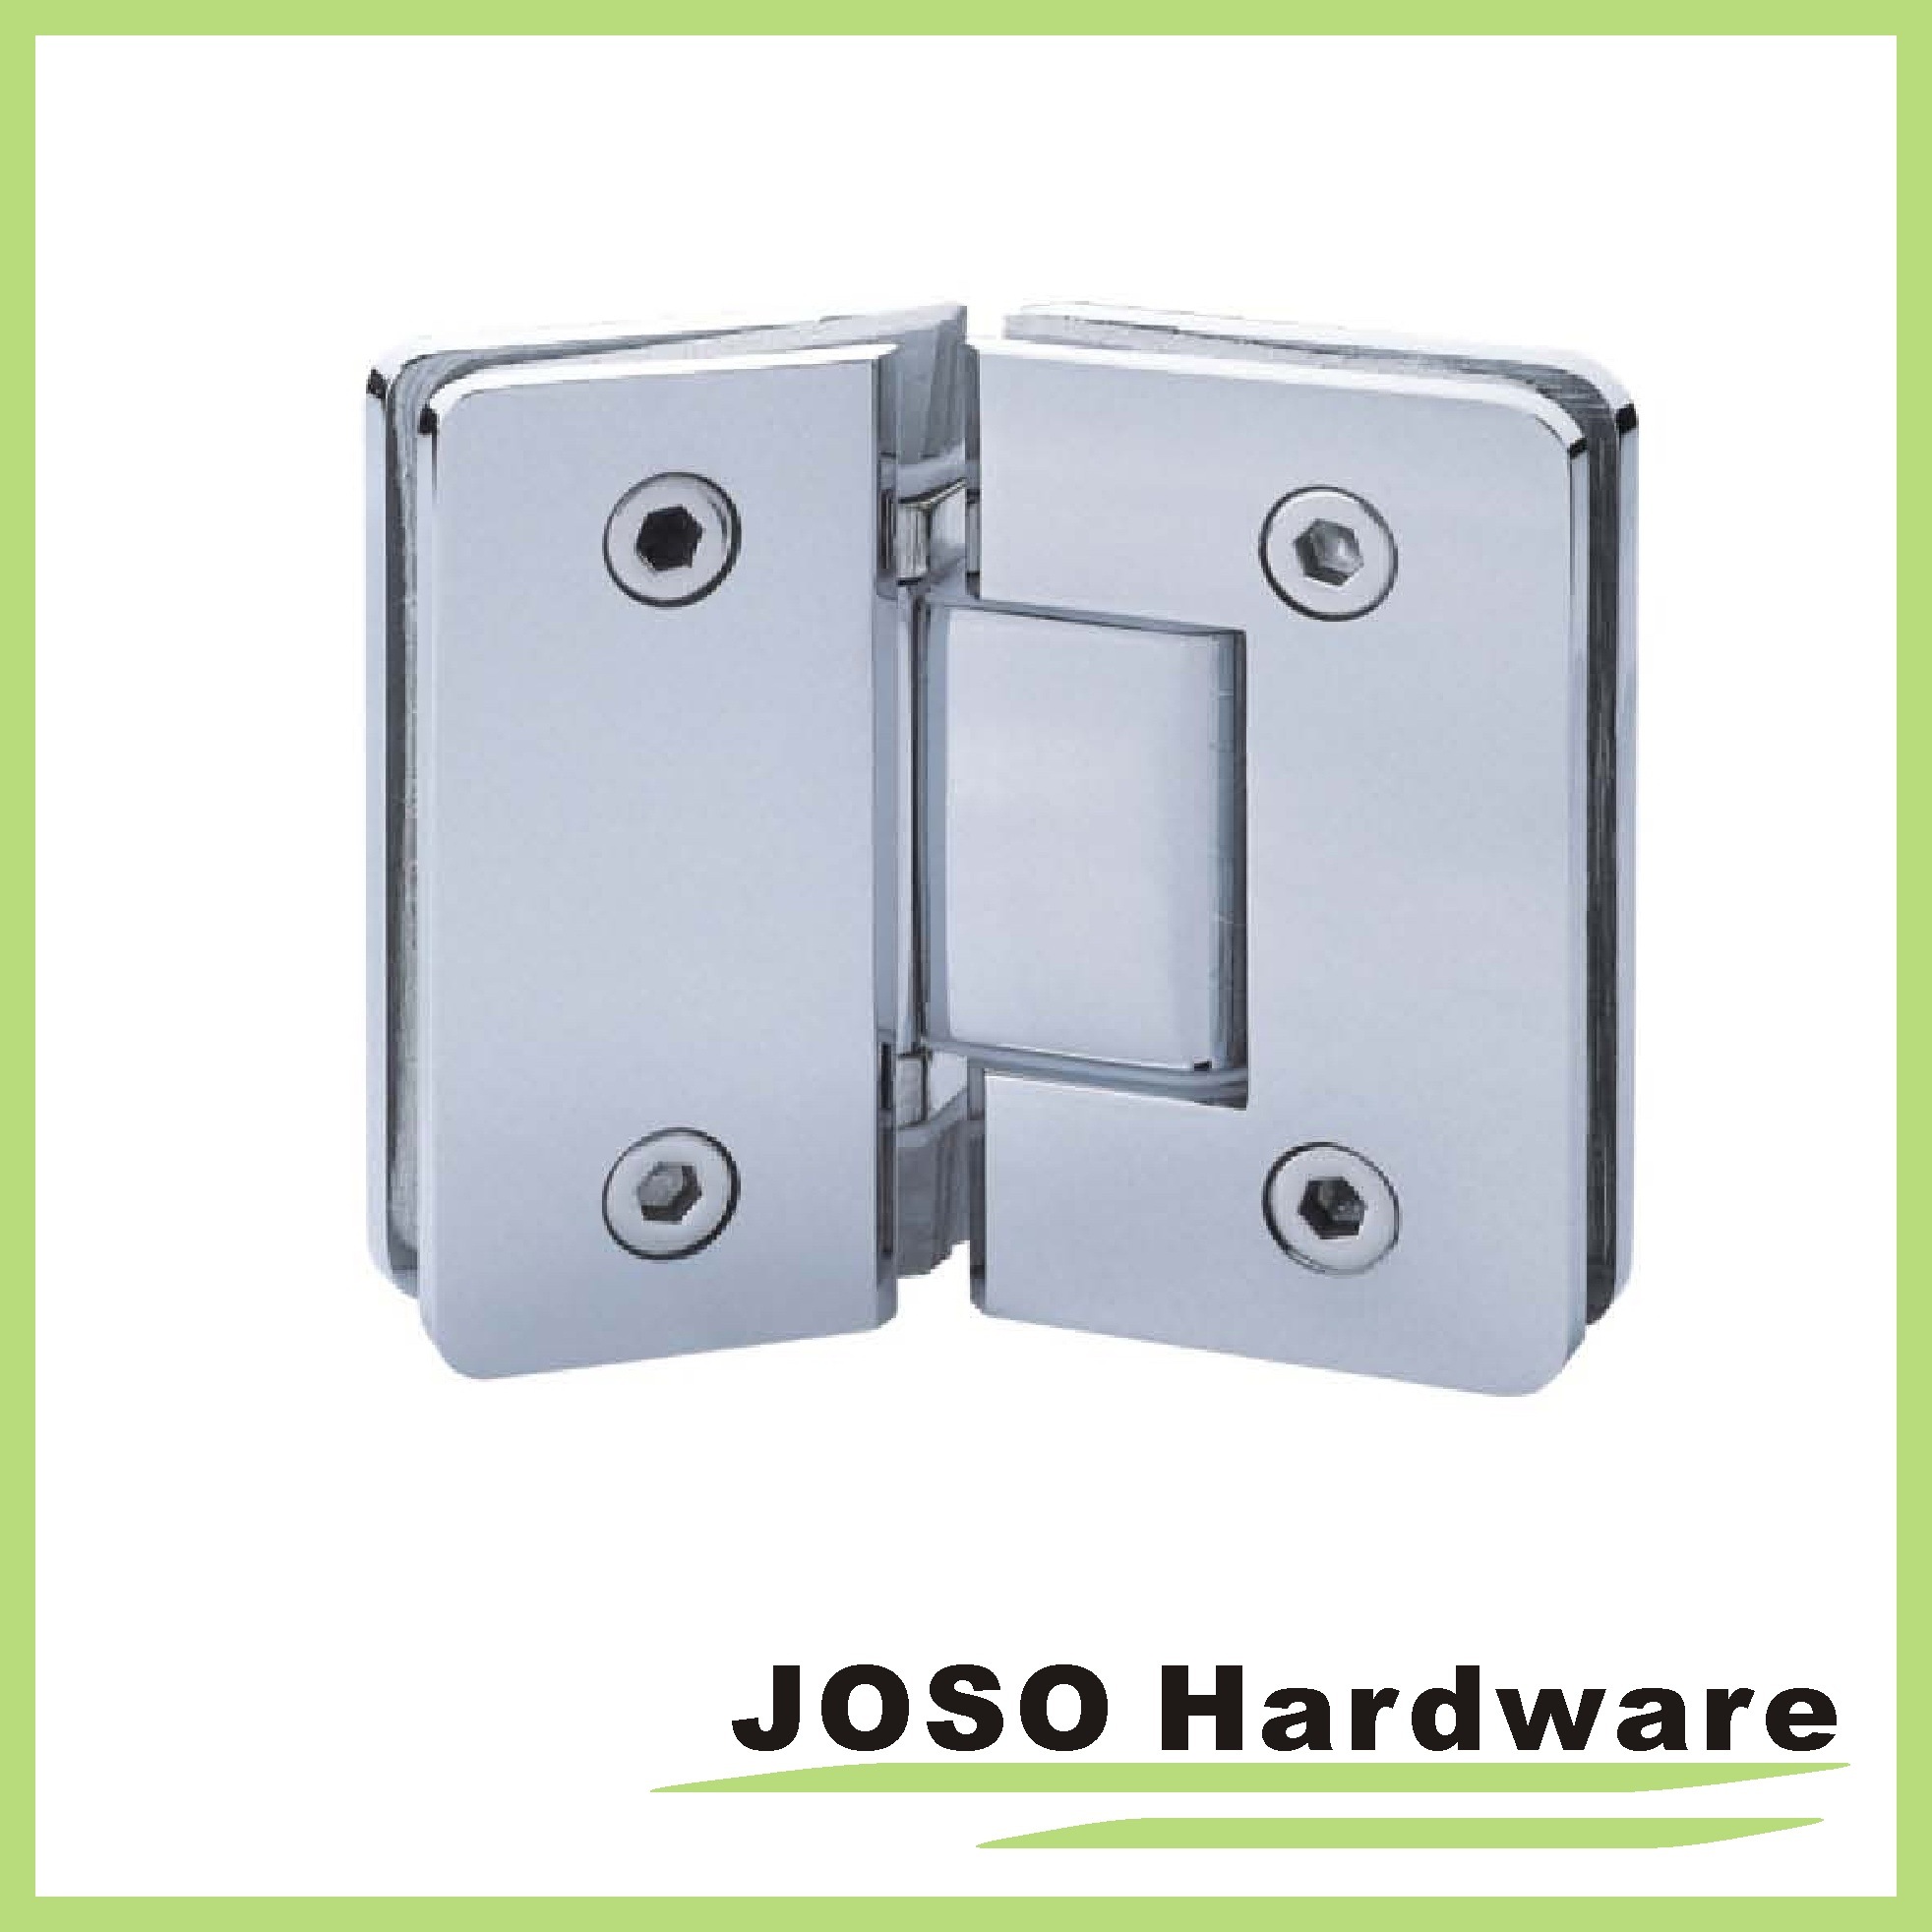 Milano Seriers Brass Hinges and Hardware Bh1003